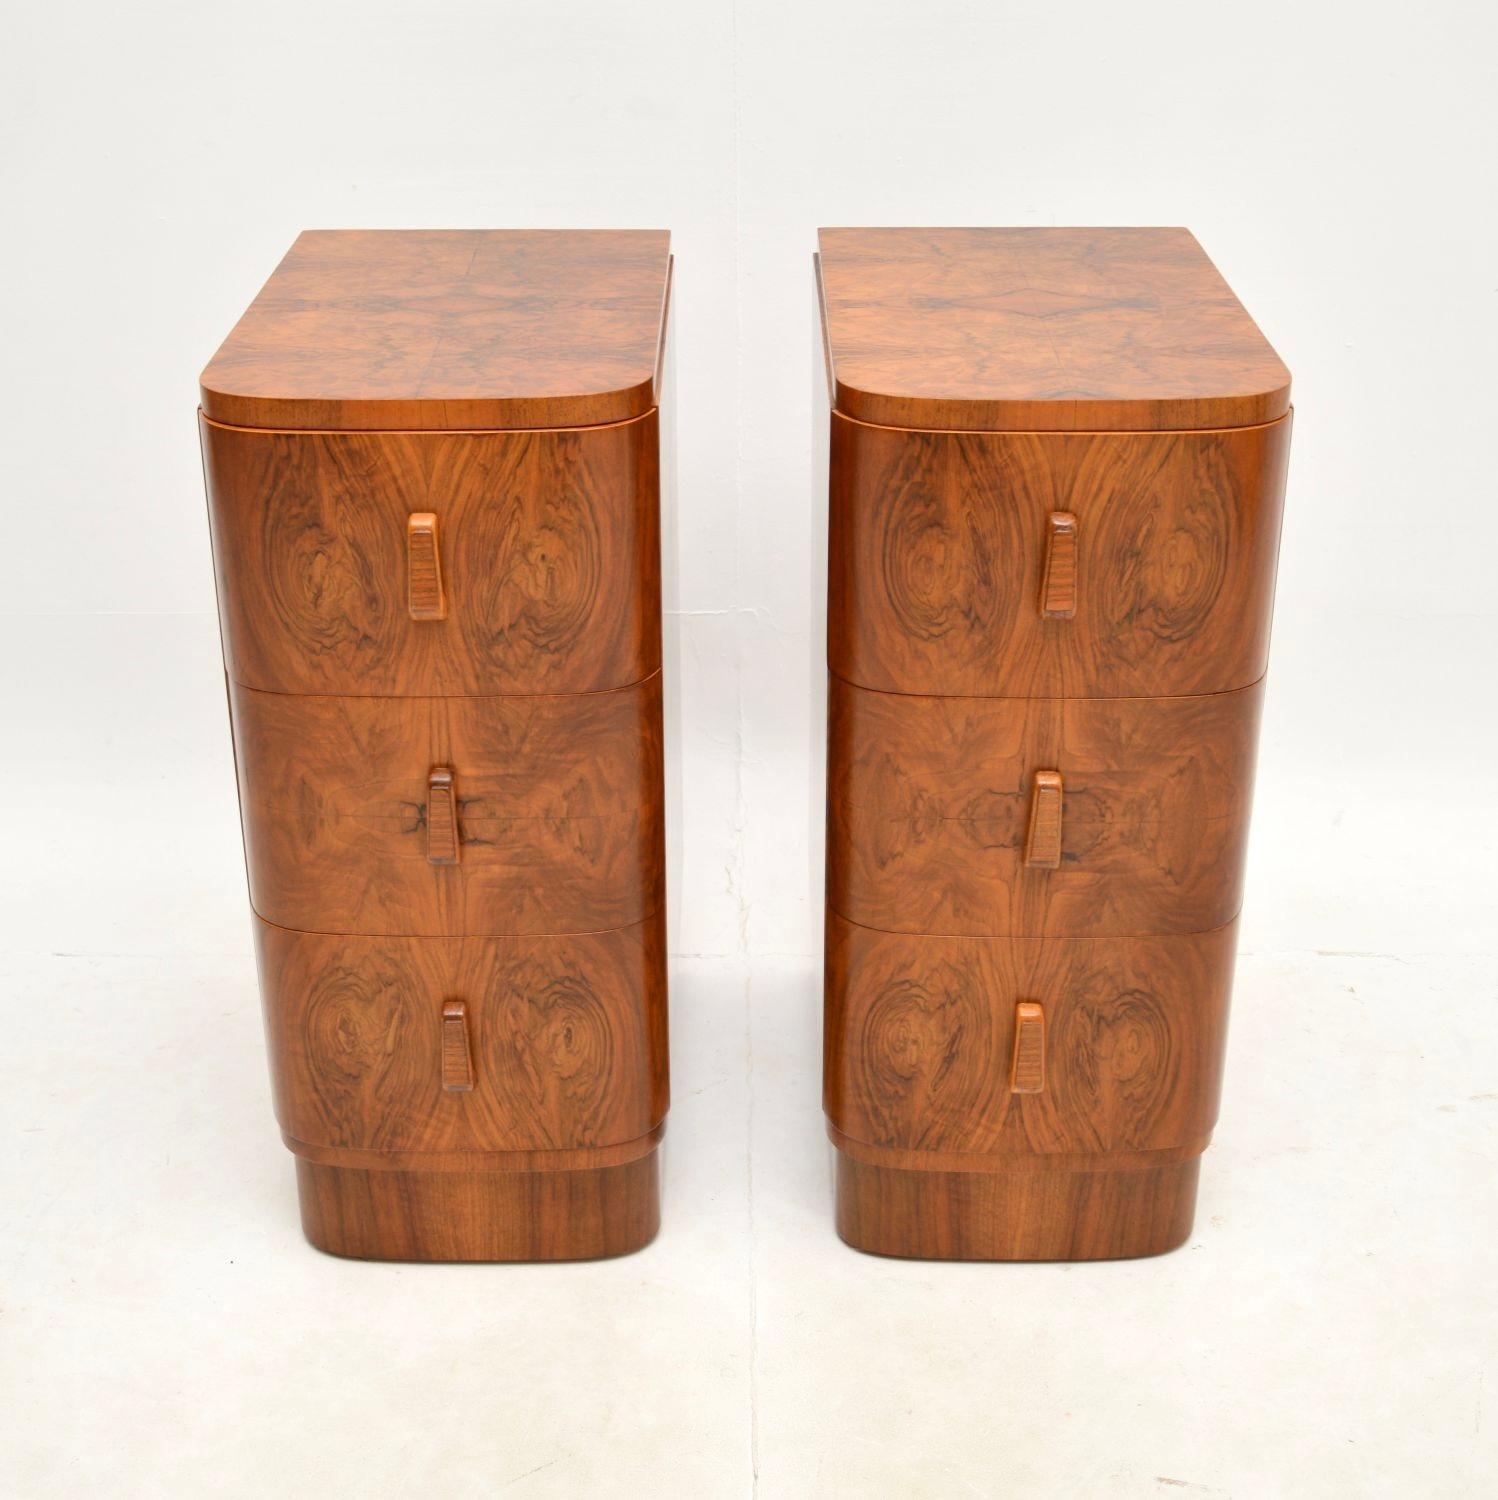 A stunning pair of Art Deco burr walnut bedside chests. They were made in England, they date from around the 1920’s.

They are of amazing quality and are a very useful size. They are tall and narrow, offering plenty of storage space inside the